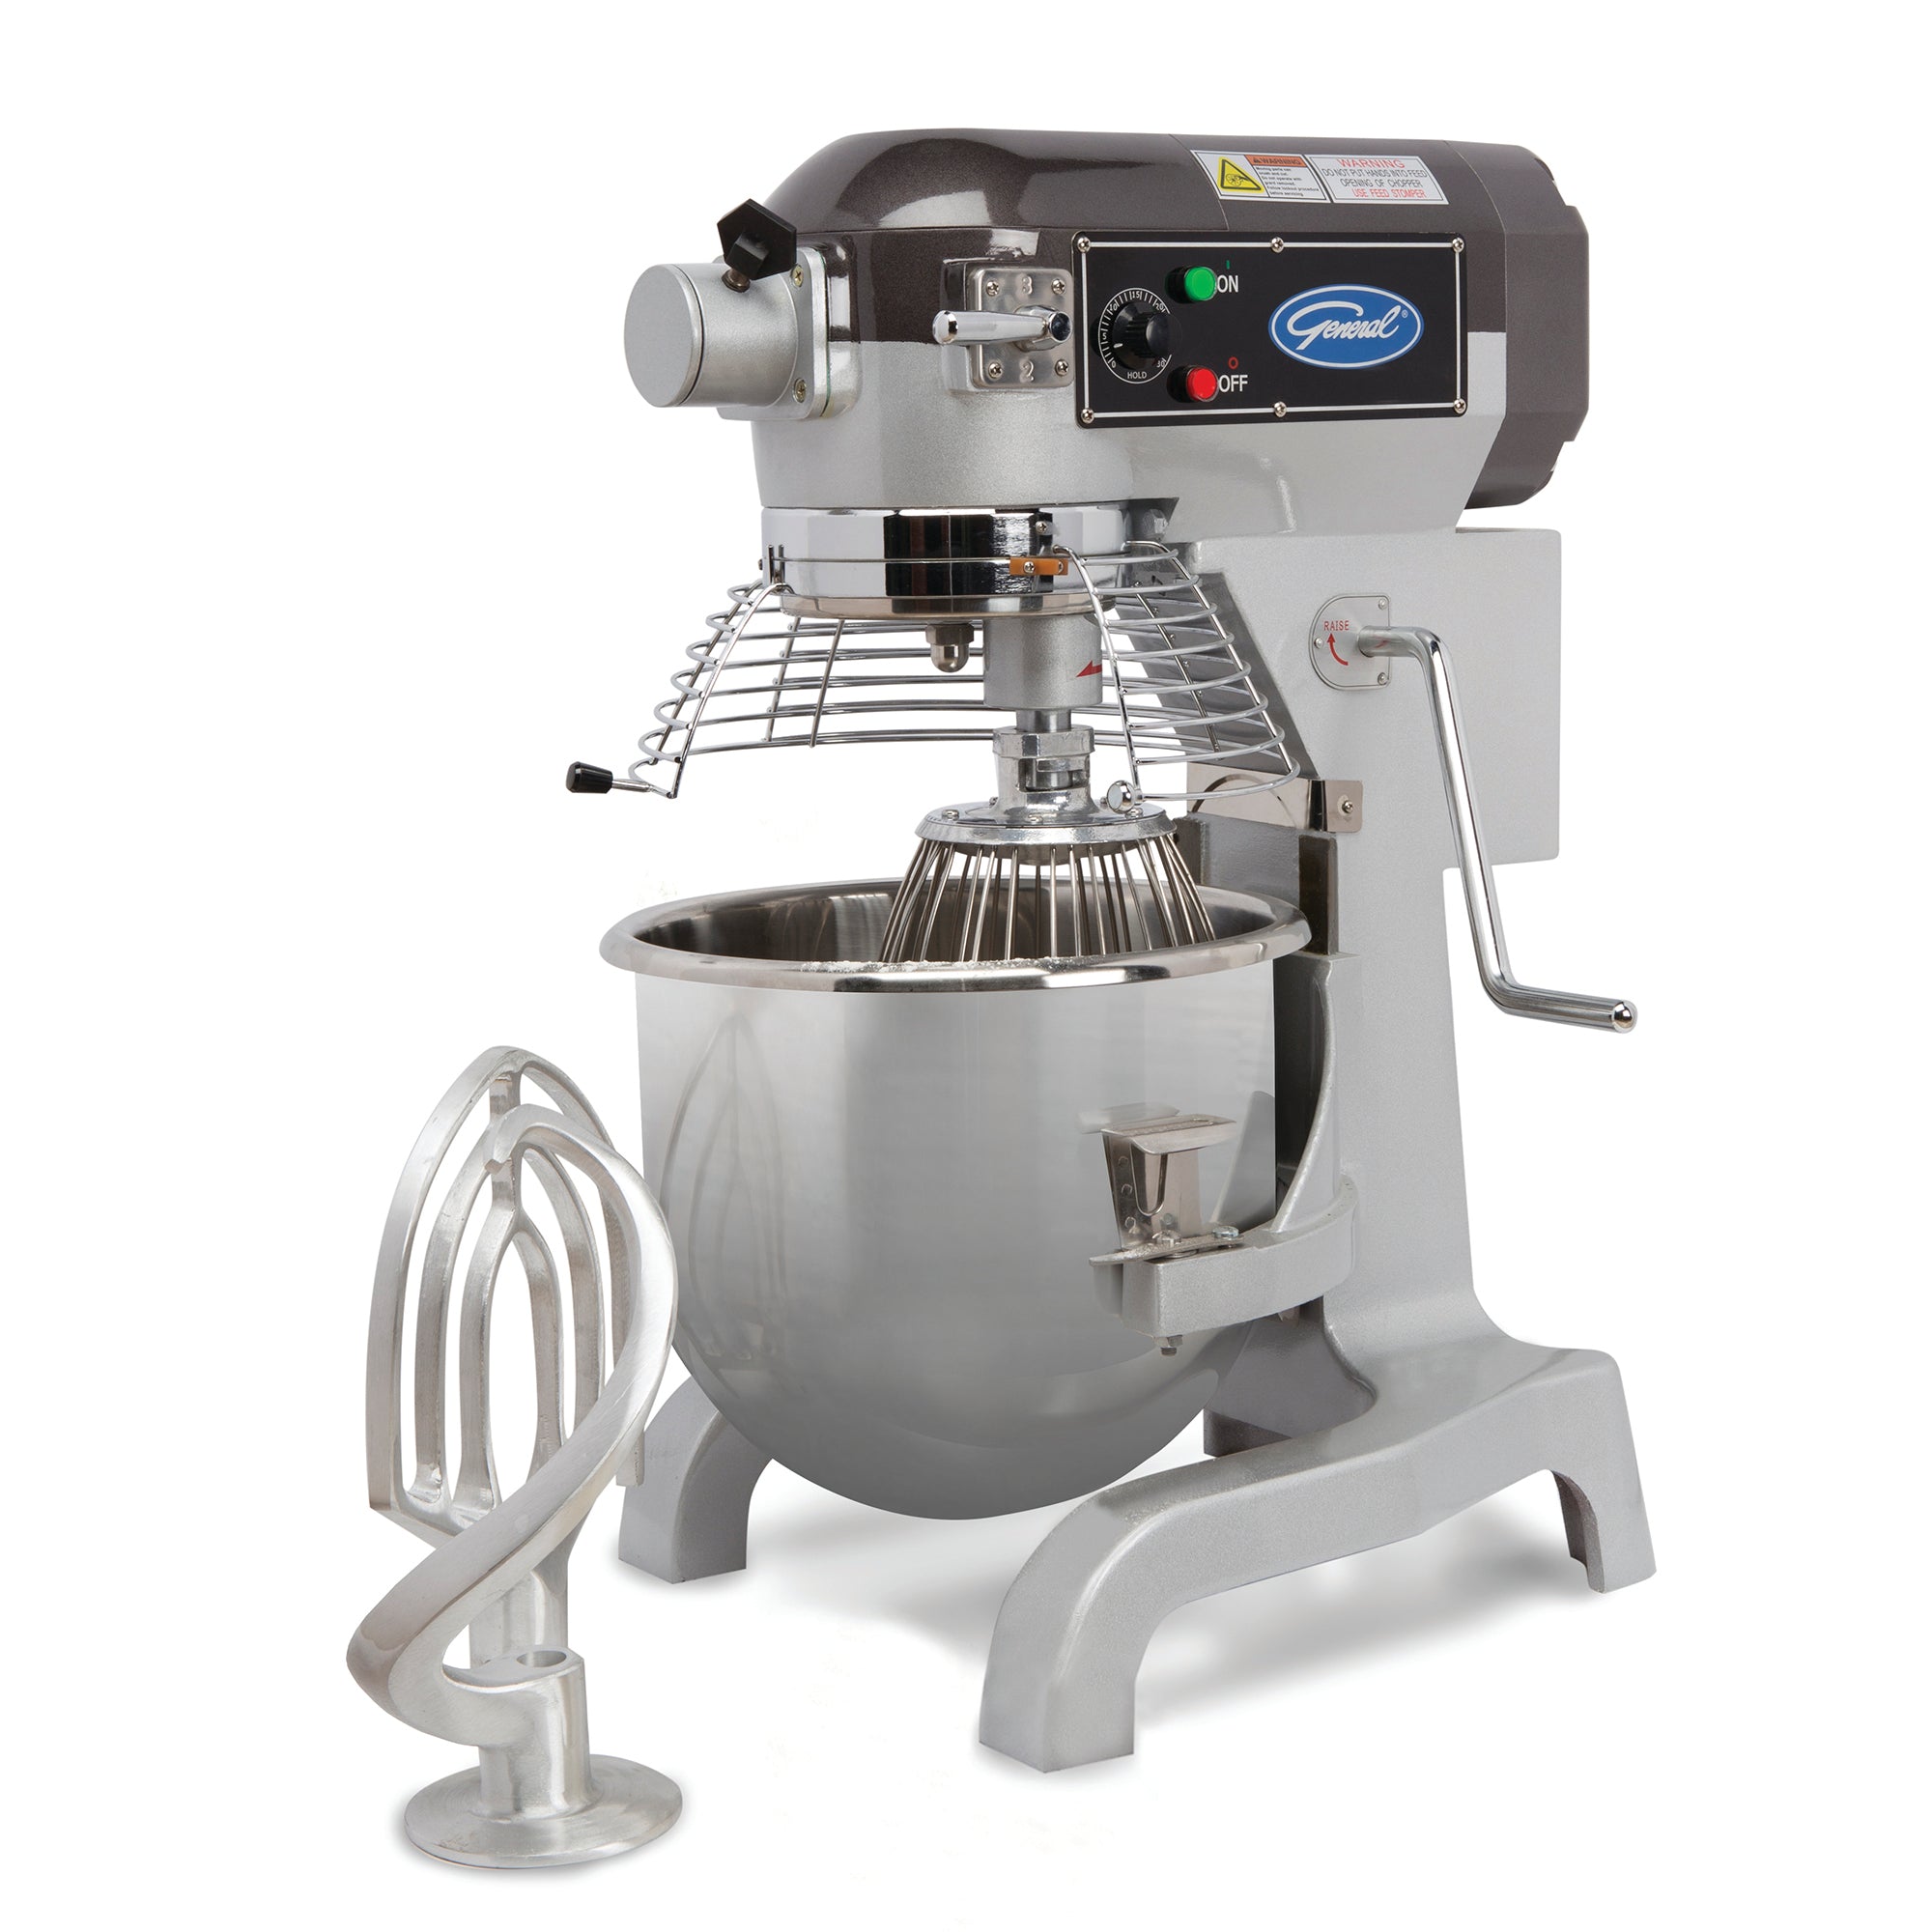 General - GEM120, General Foodservice Planetary Stand Mixer, 20 Quart, with Guard and Standard Accessories, 120V, 1.5 HP, in Stainless Steel